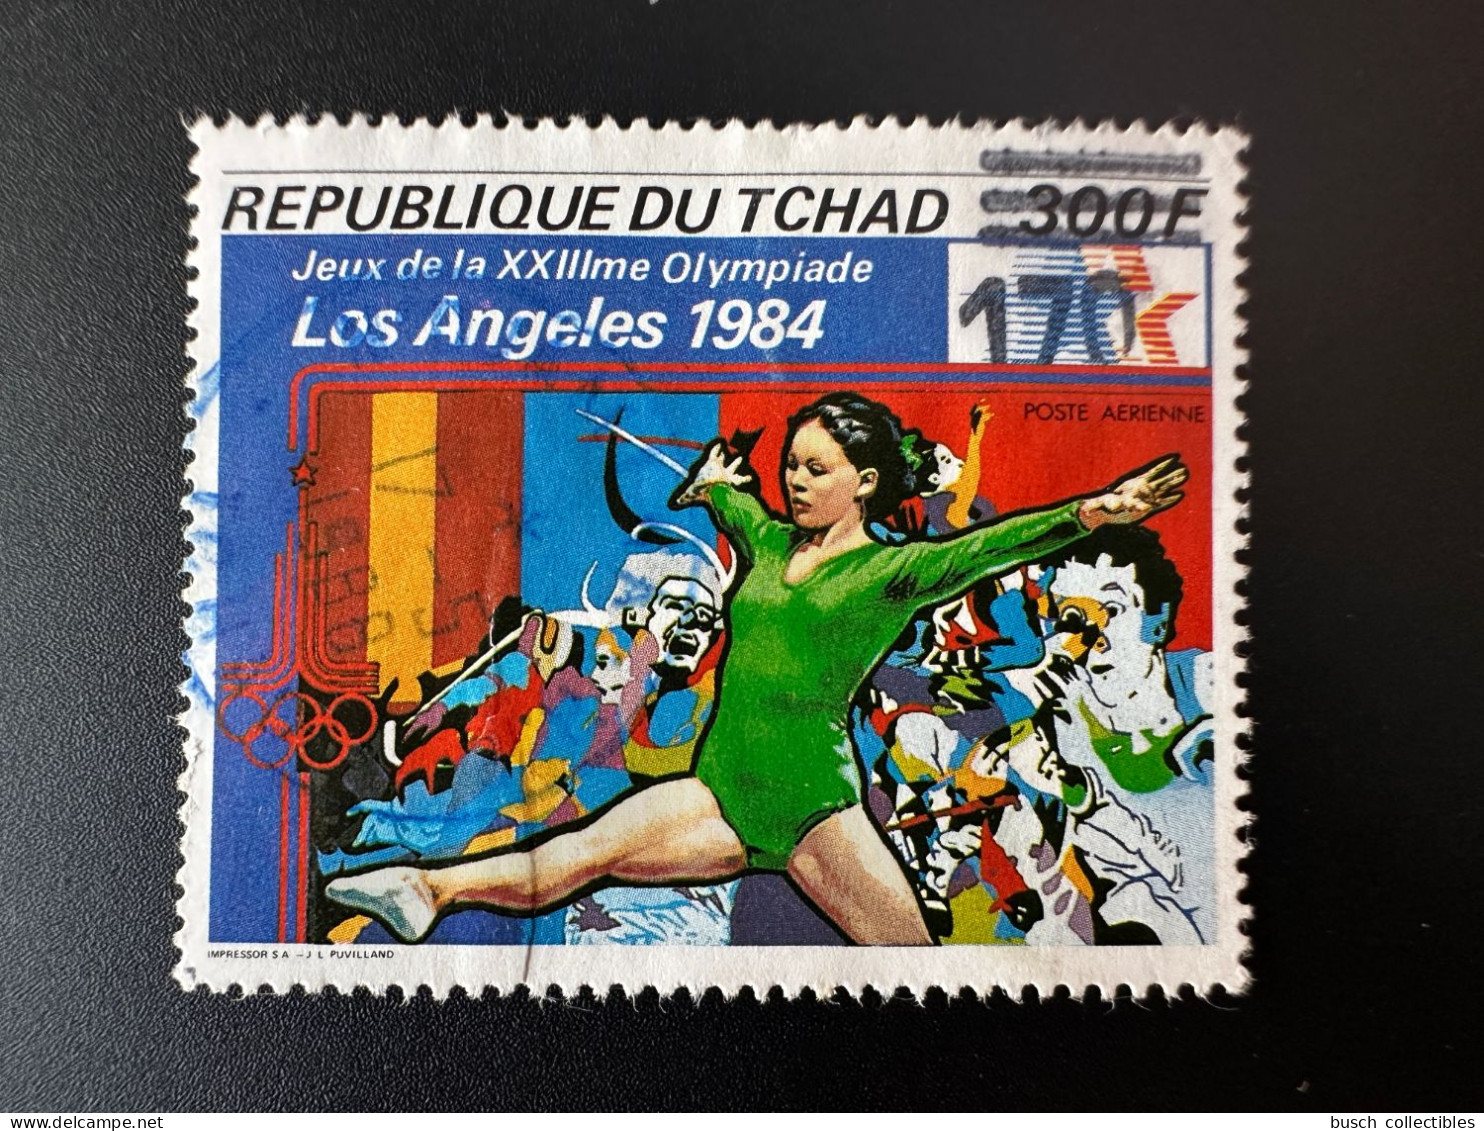 Tchad Chad Tschad 1987 / 1988 Mi. 1149 Oblitéré Used Surchargé Overprint Olympic Games Jeux Olympiques Los Angeles 1984 - Tschad (1960-...)